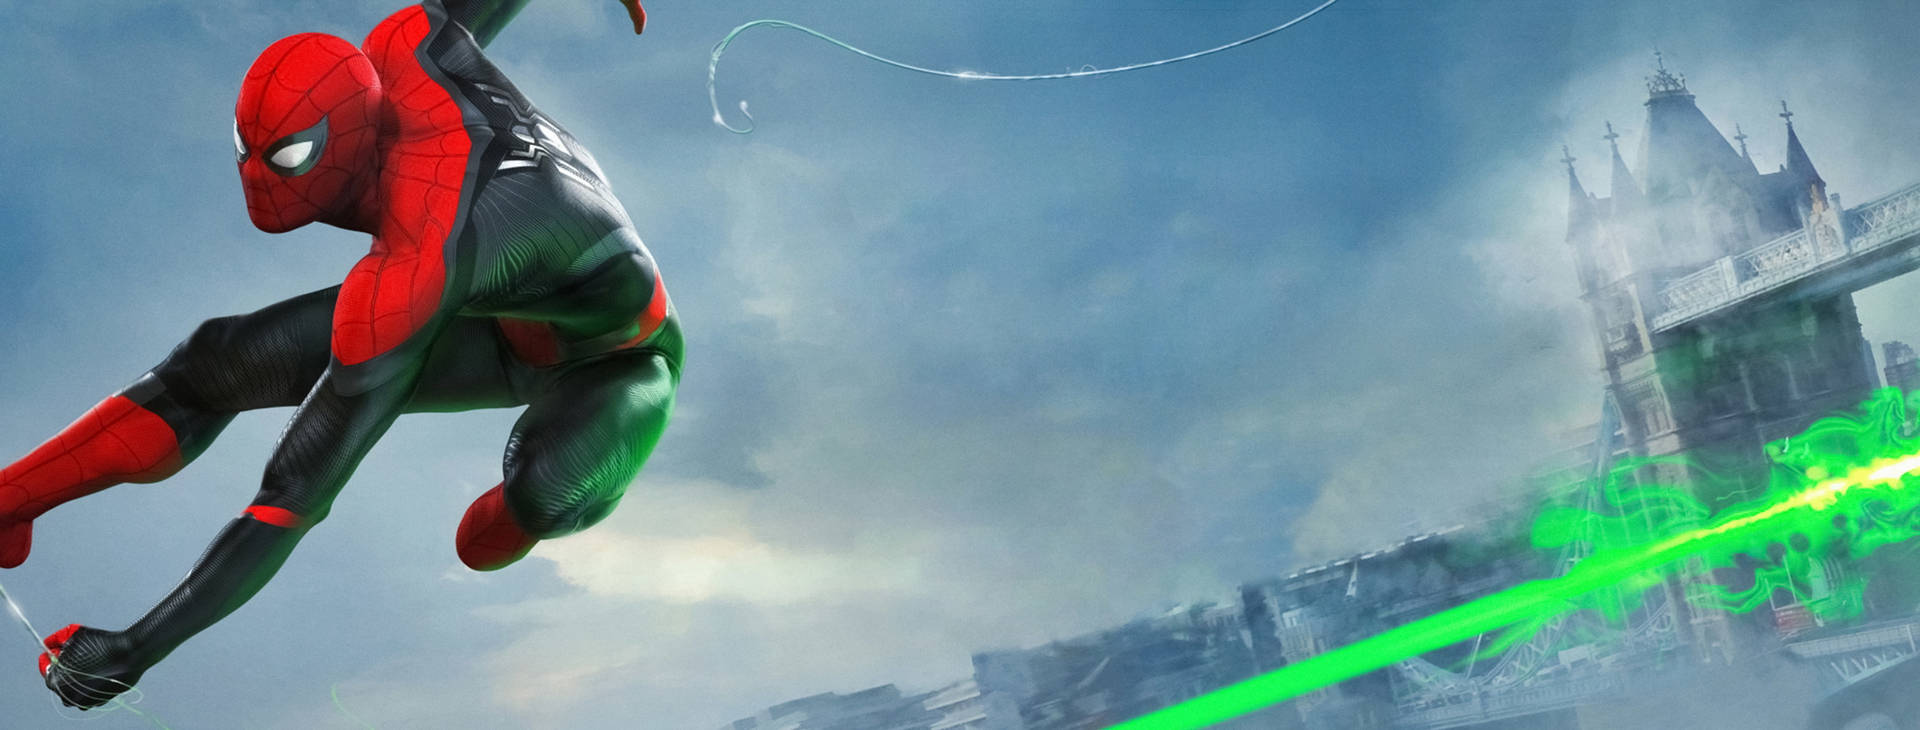 Green Rays Spider Man Far From Home 2019 Wallpaper